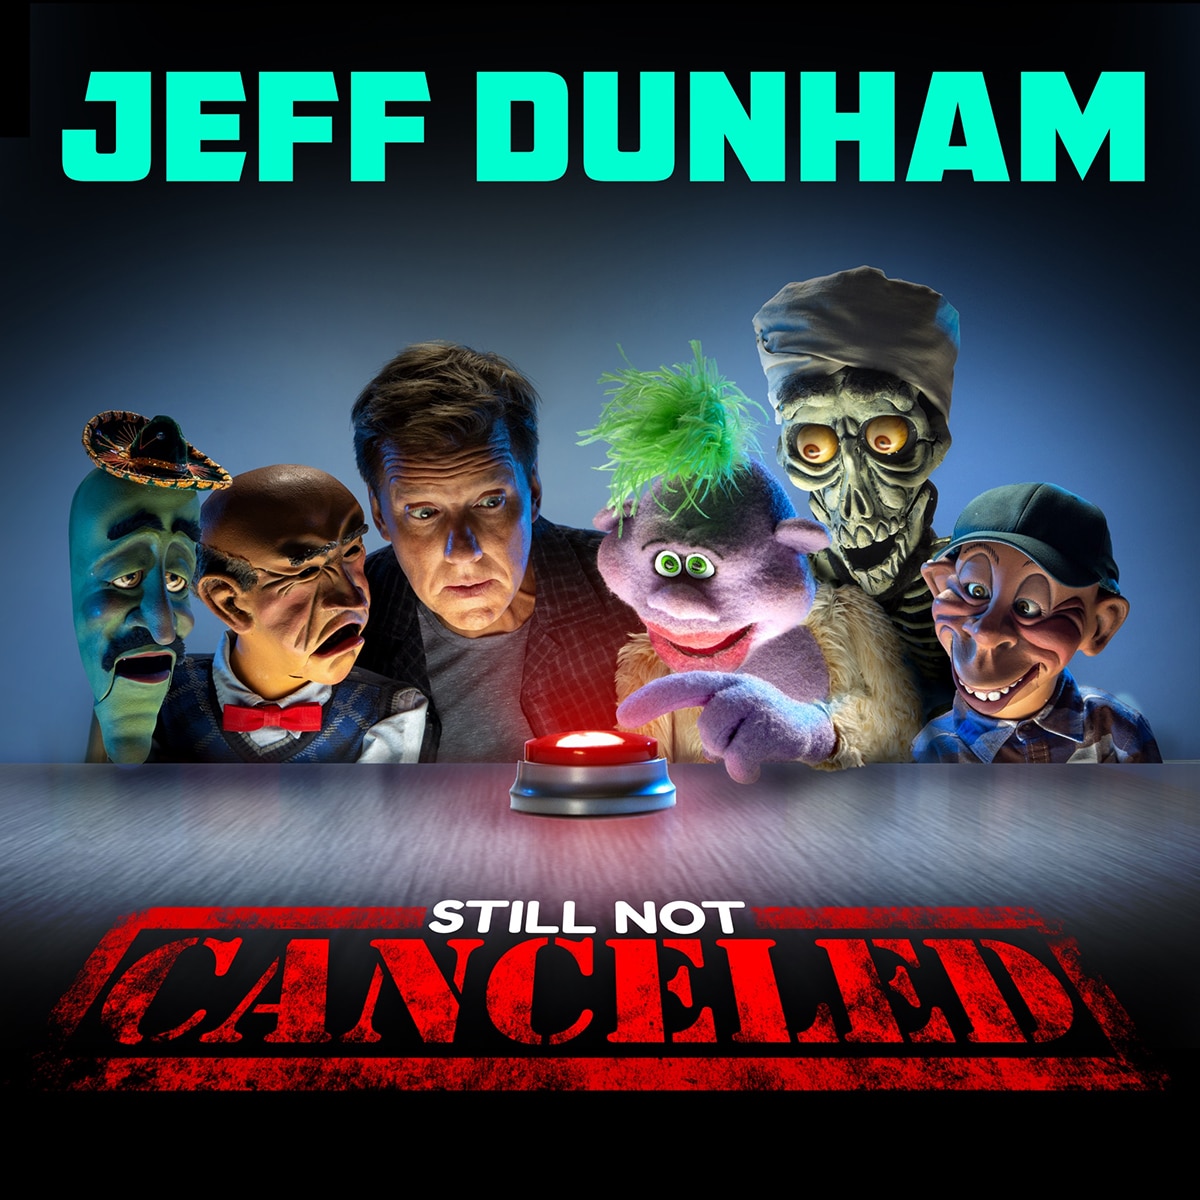 square photo of Jeff Dunham with his ventriloquist dummies and the words Still Not Canceled at the bottom. Image courtesy of Jeff Dunham and Personal Publicity